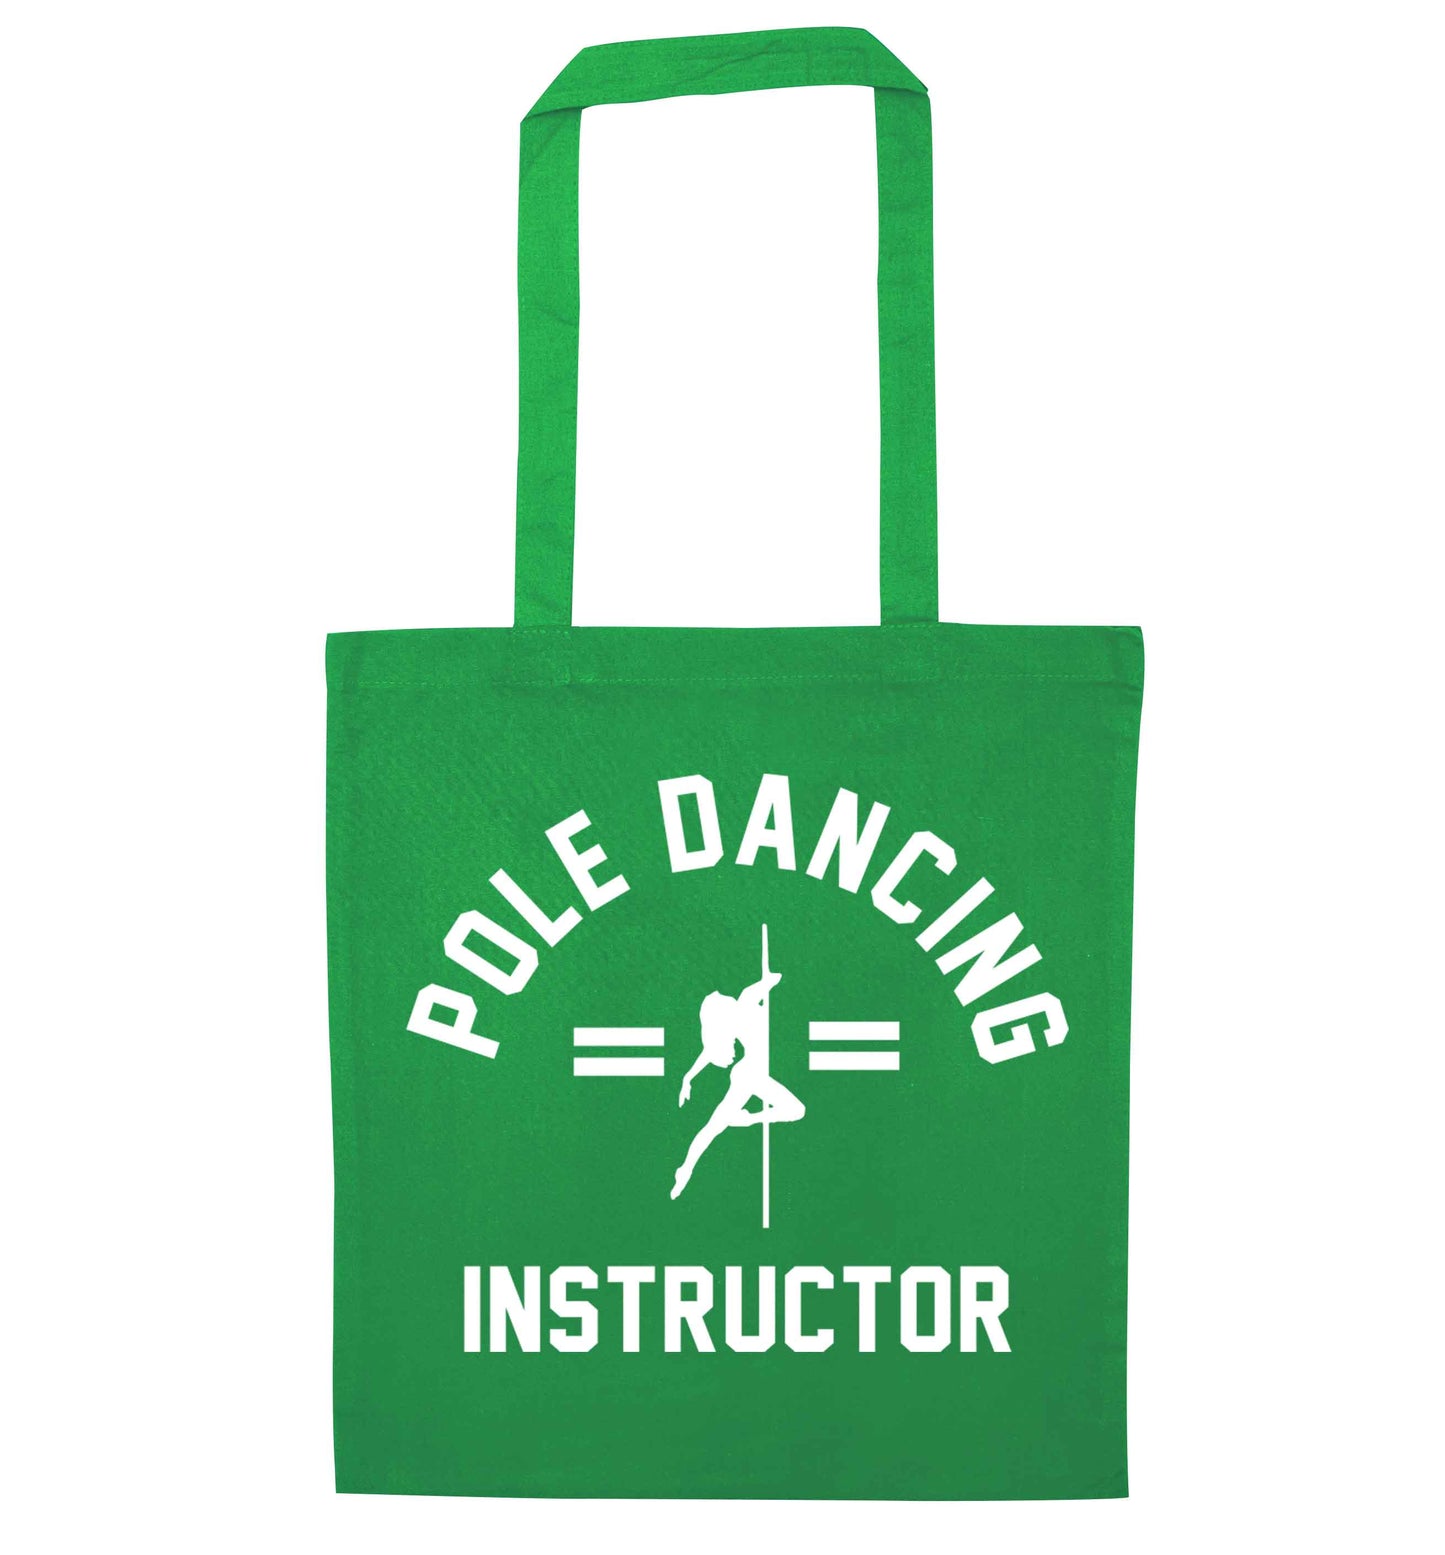 Pole dancing instructor green tote bag